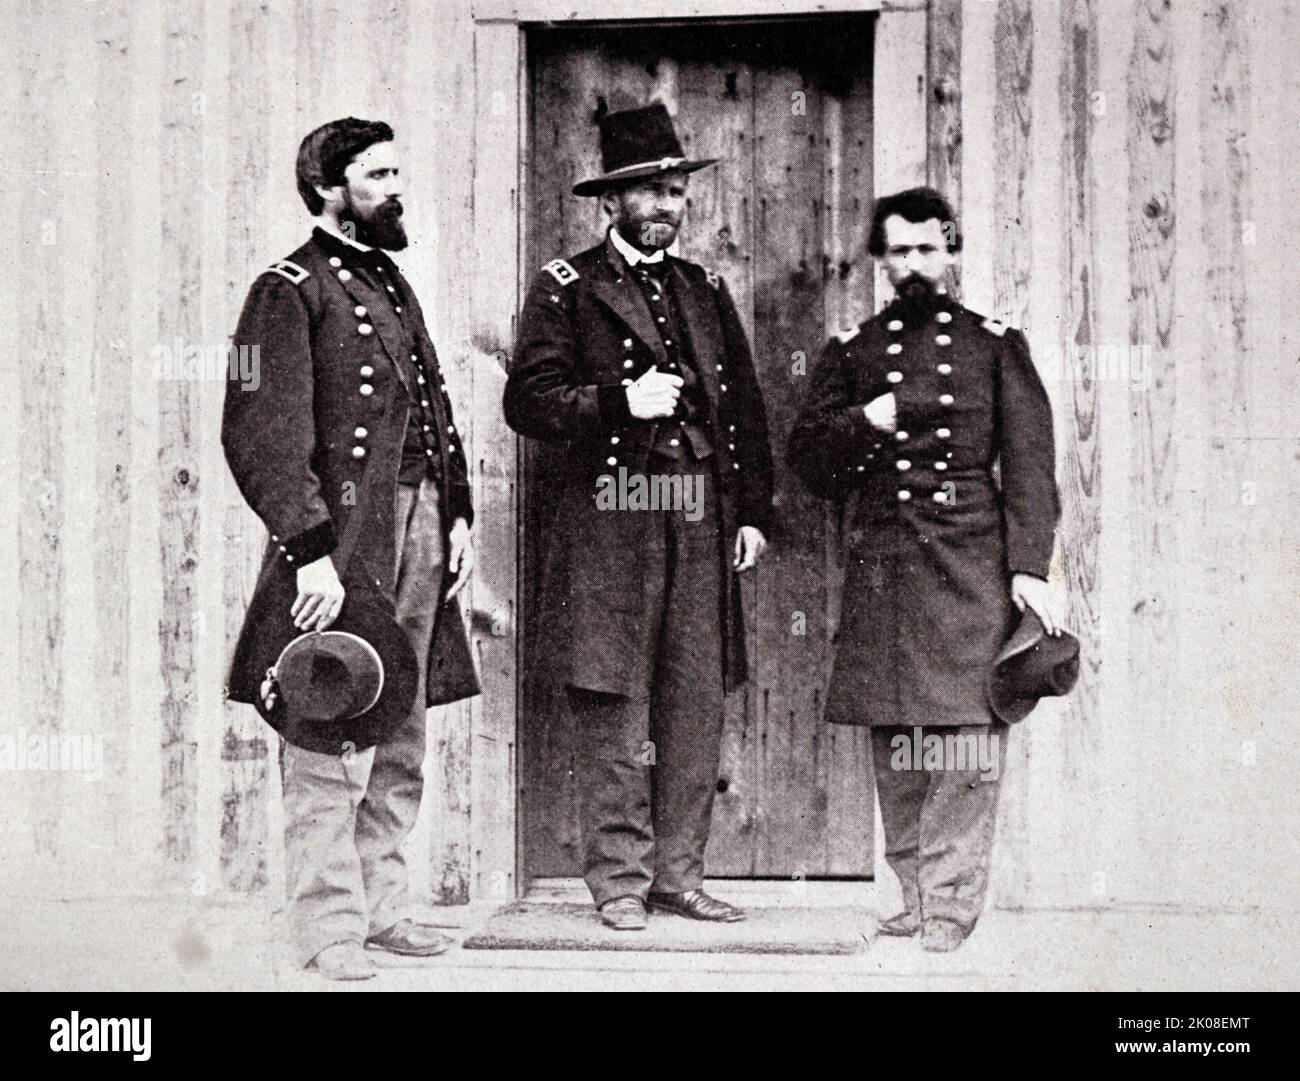 General John A. Rawlins, General U. S. Grant, Colonel Theo S. Bowers during the American Civil War. The American Civil War (April 12, 1861 - May 9, 1865) was a civil war in the United States between the Union and the Confederacy states Stock Photo